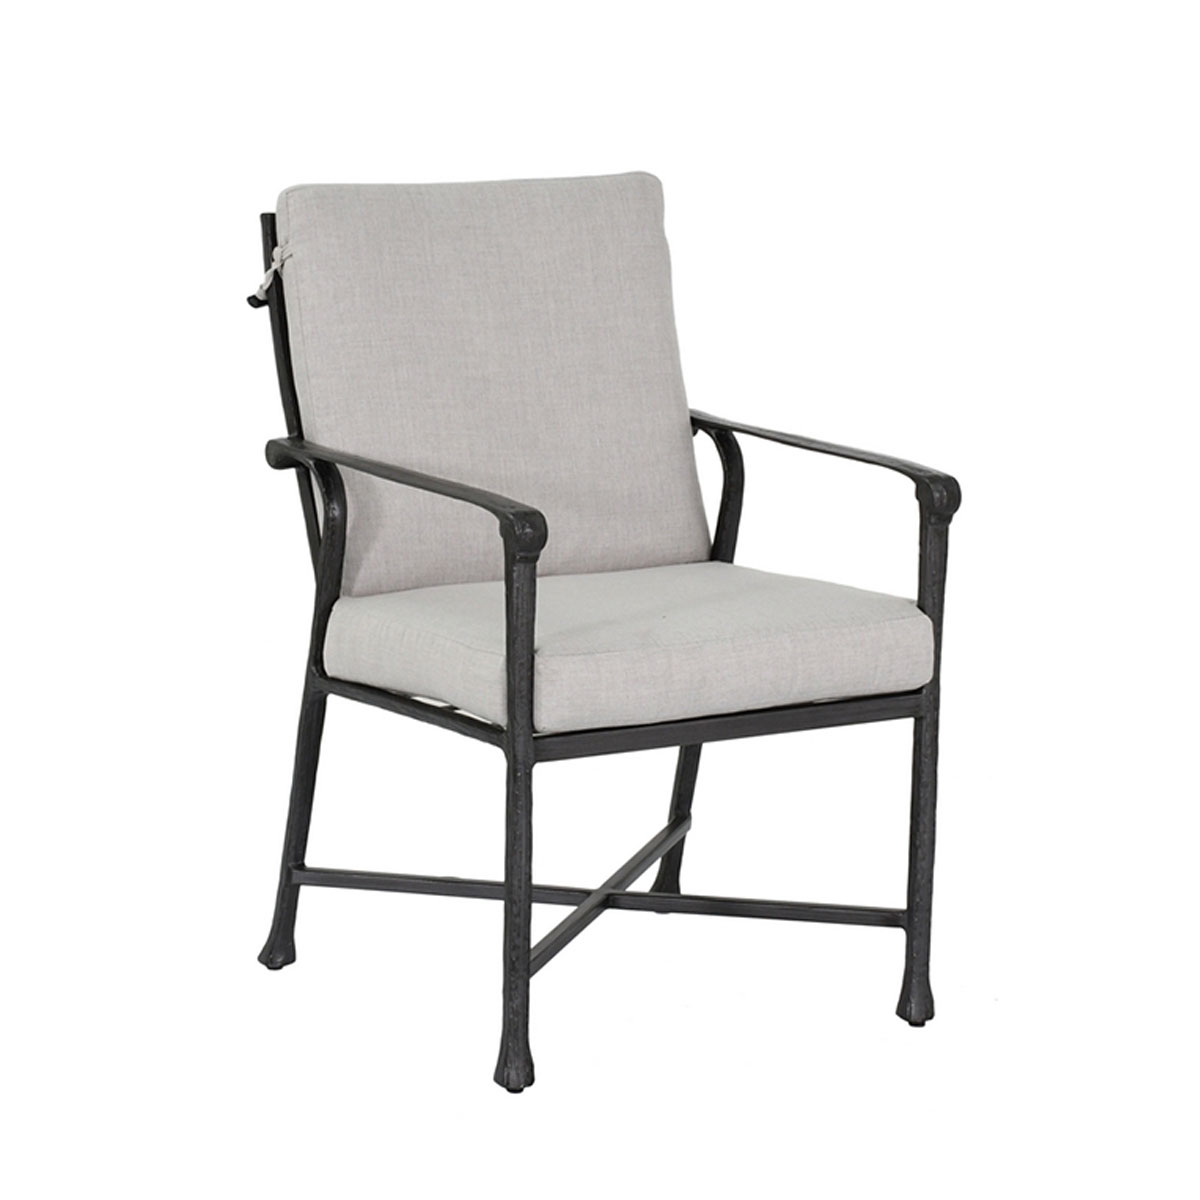 Castelle Marquis Formal Arm Dining Chair